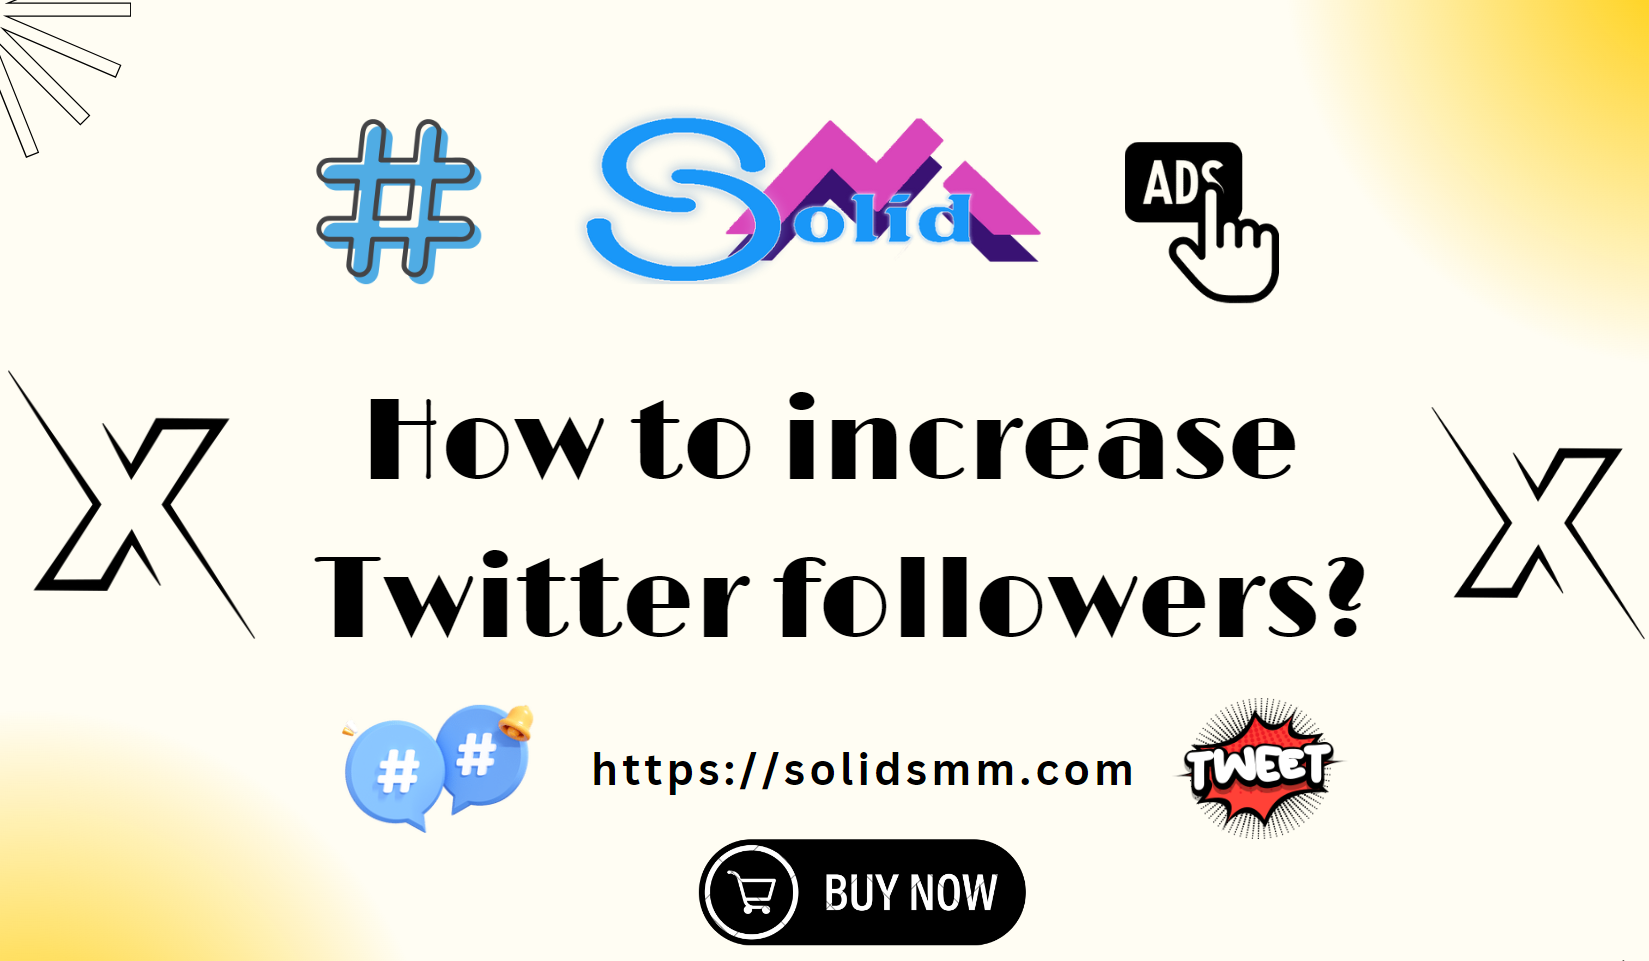 How to increase Twitter followers - Buy Twitter followers